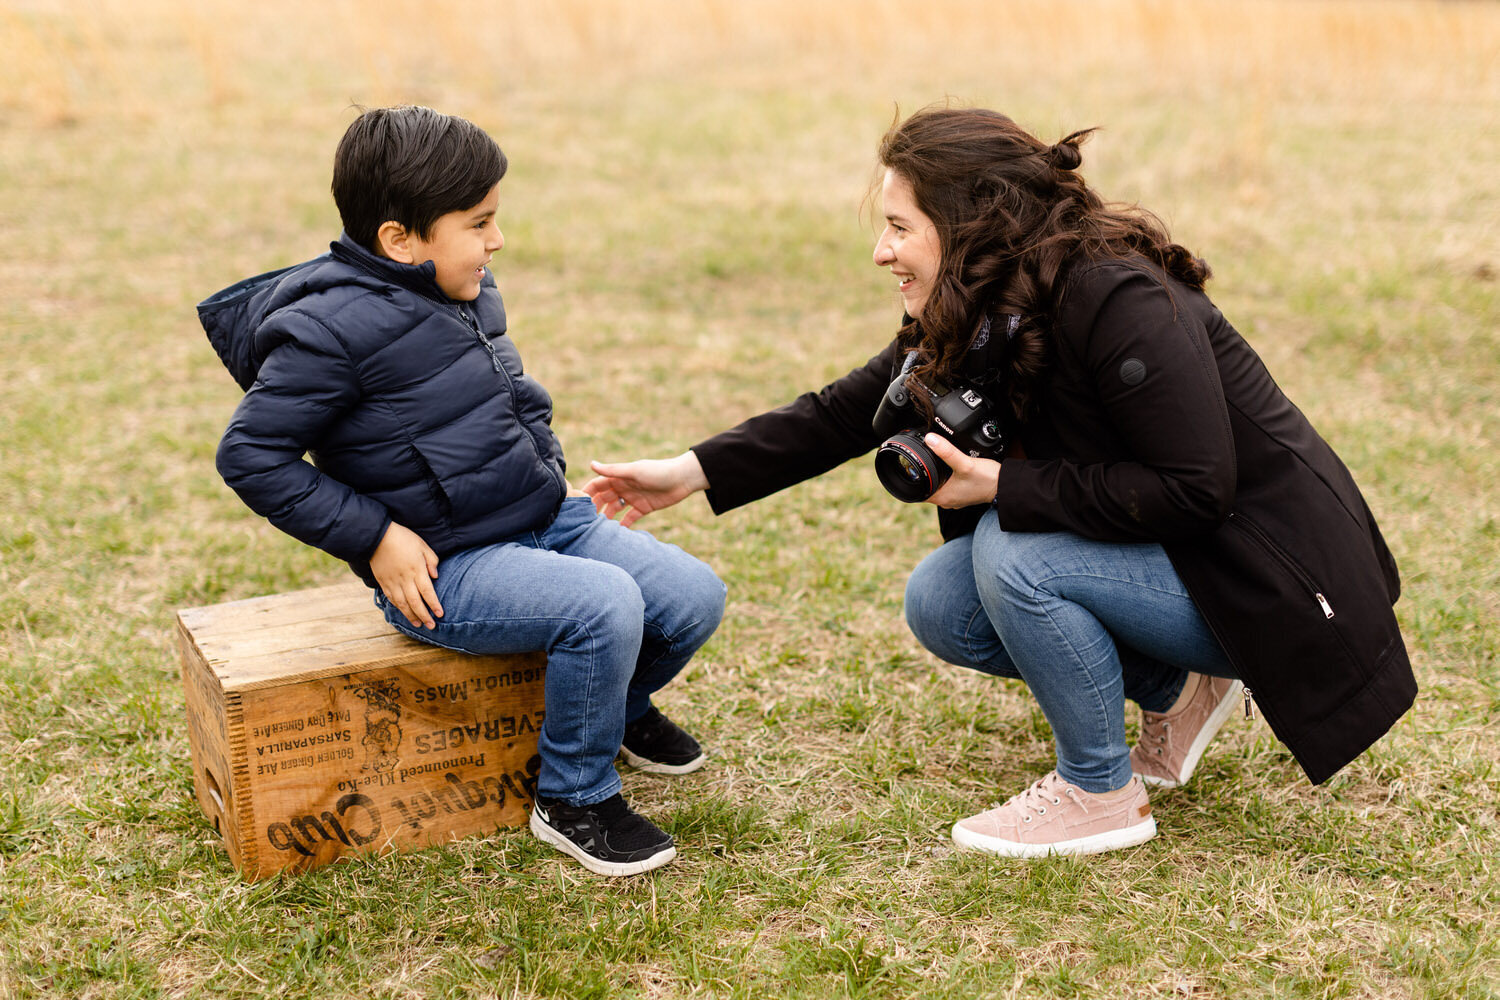 photographer bent down talking to young child who is sitting on a wooden box